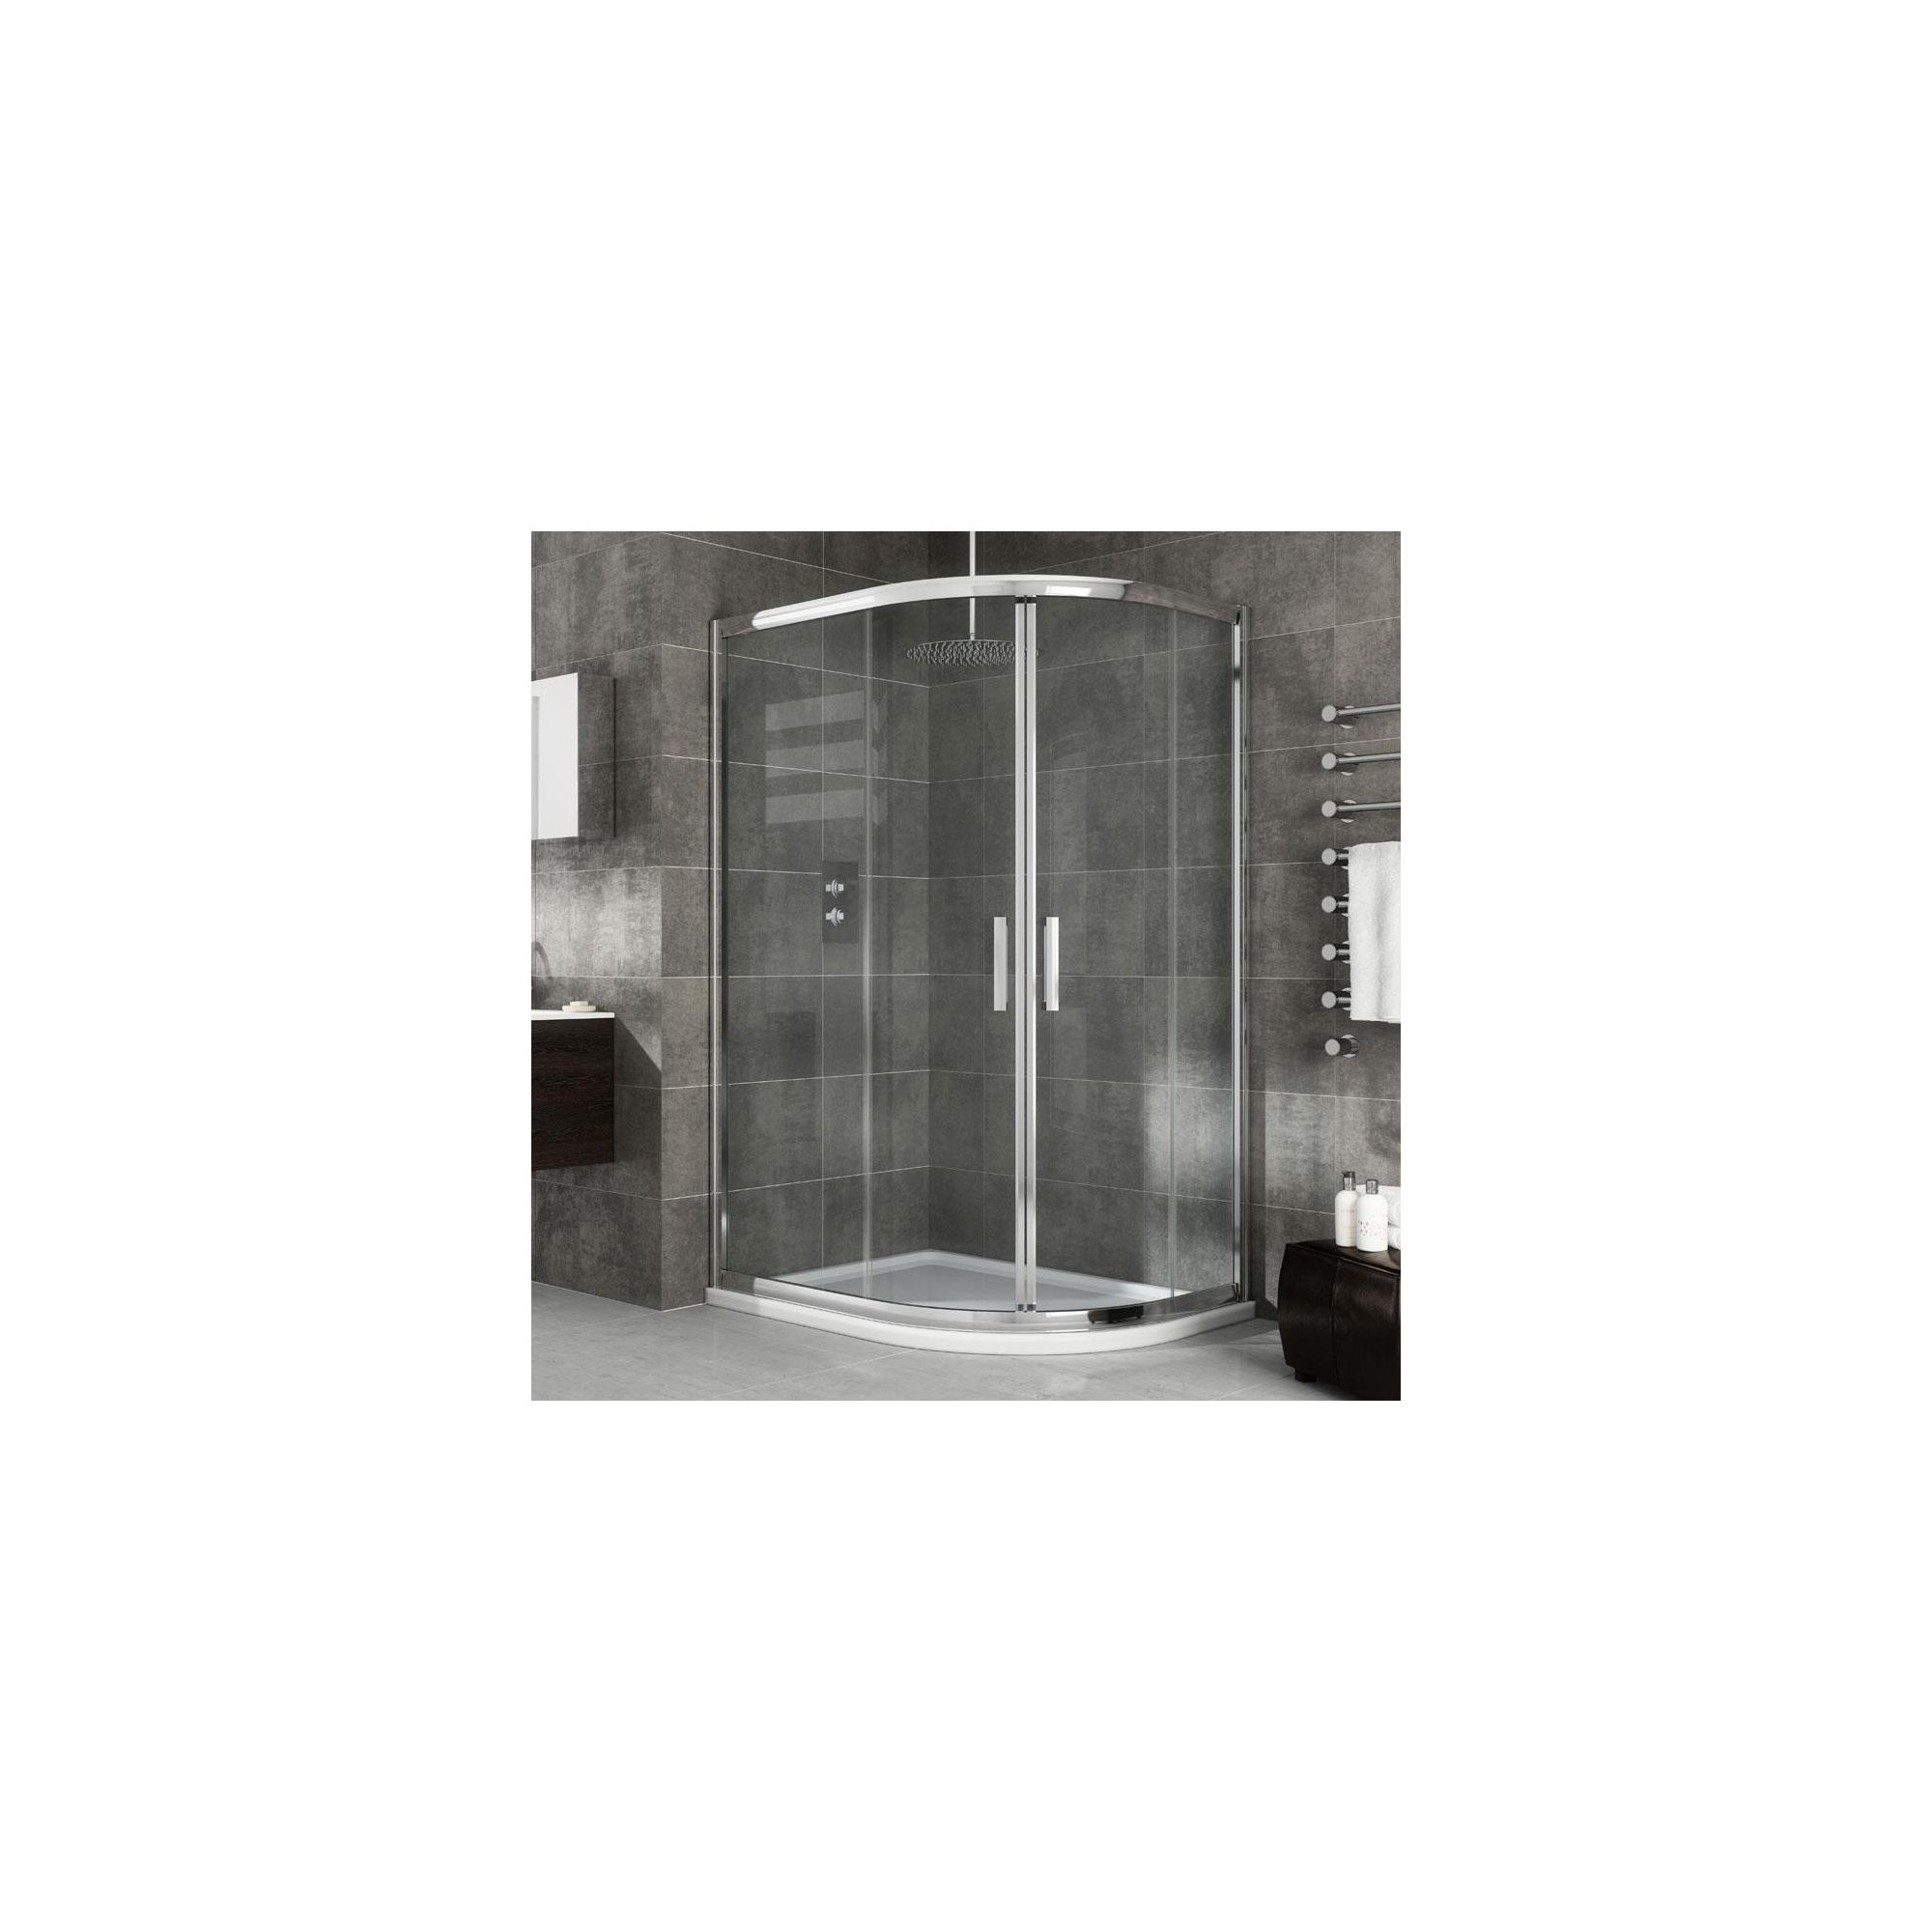 Elemis Eternity Offset Quadrant Shower Enclosure, 1200mm x 900mm, 8mm Glass, Low Profile Tray, Left Handed at Tesco Direct